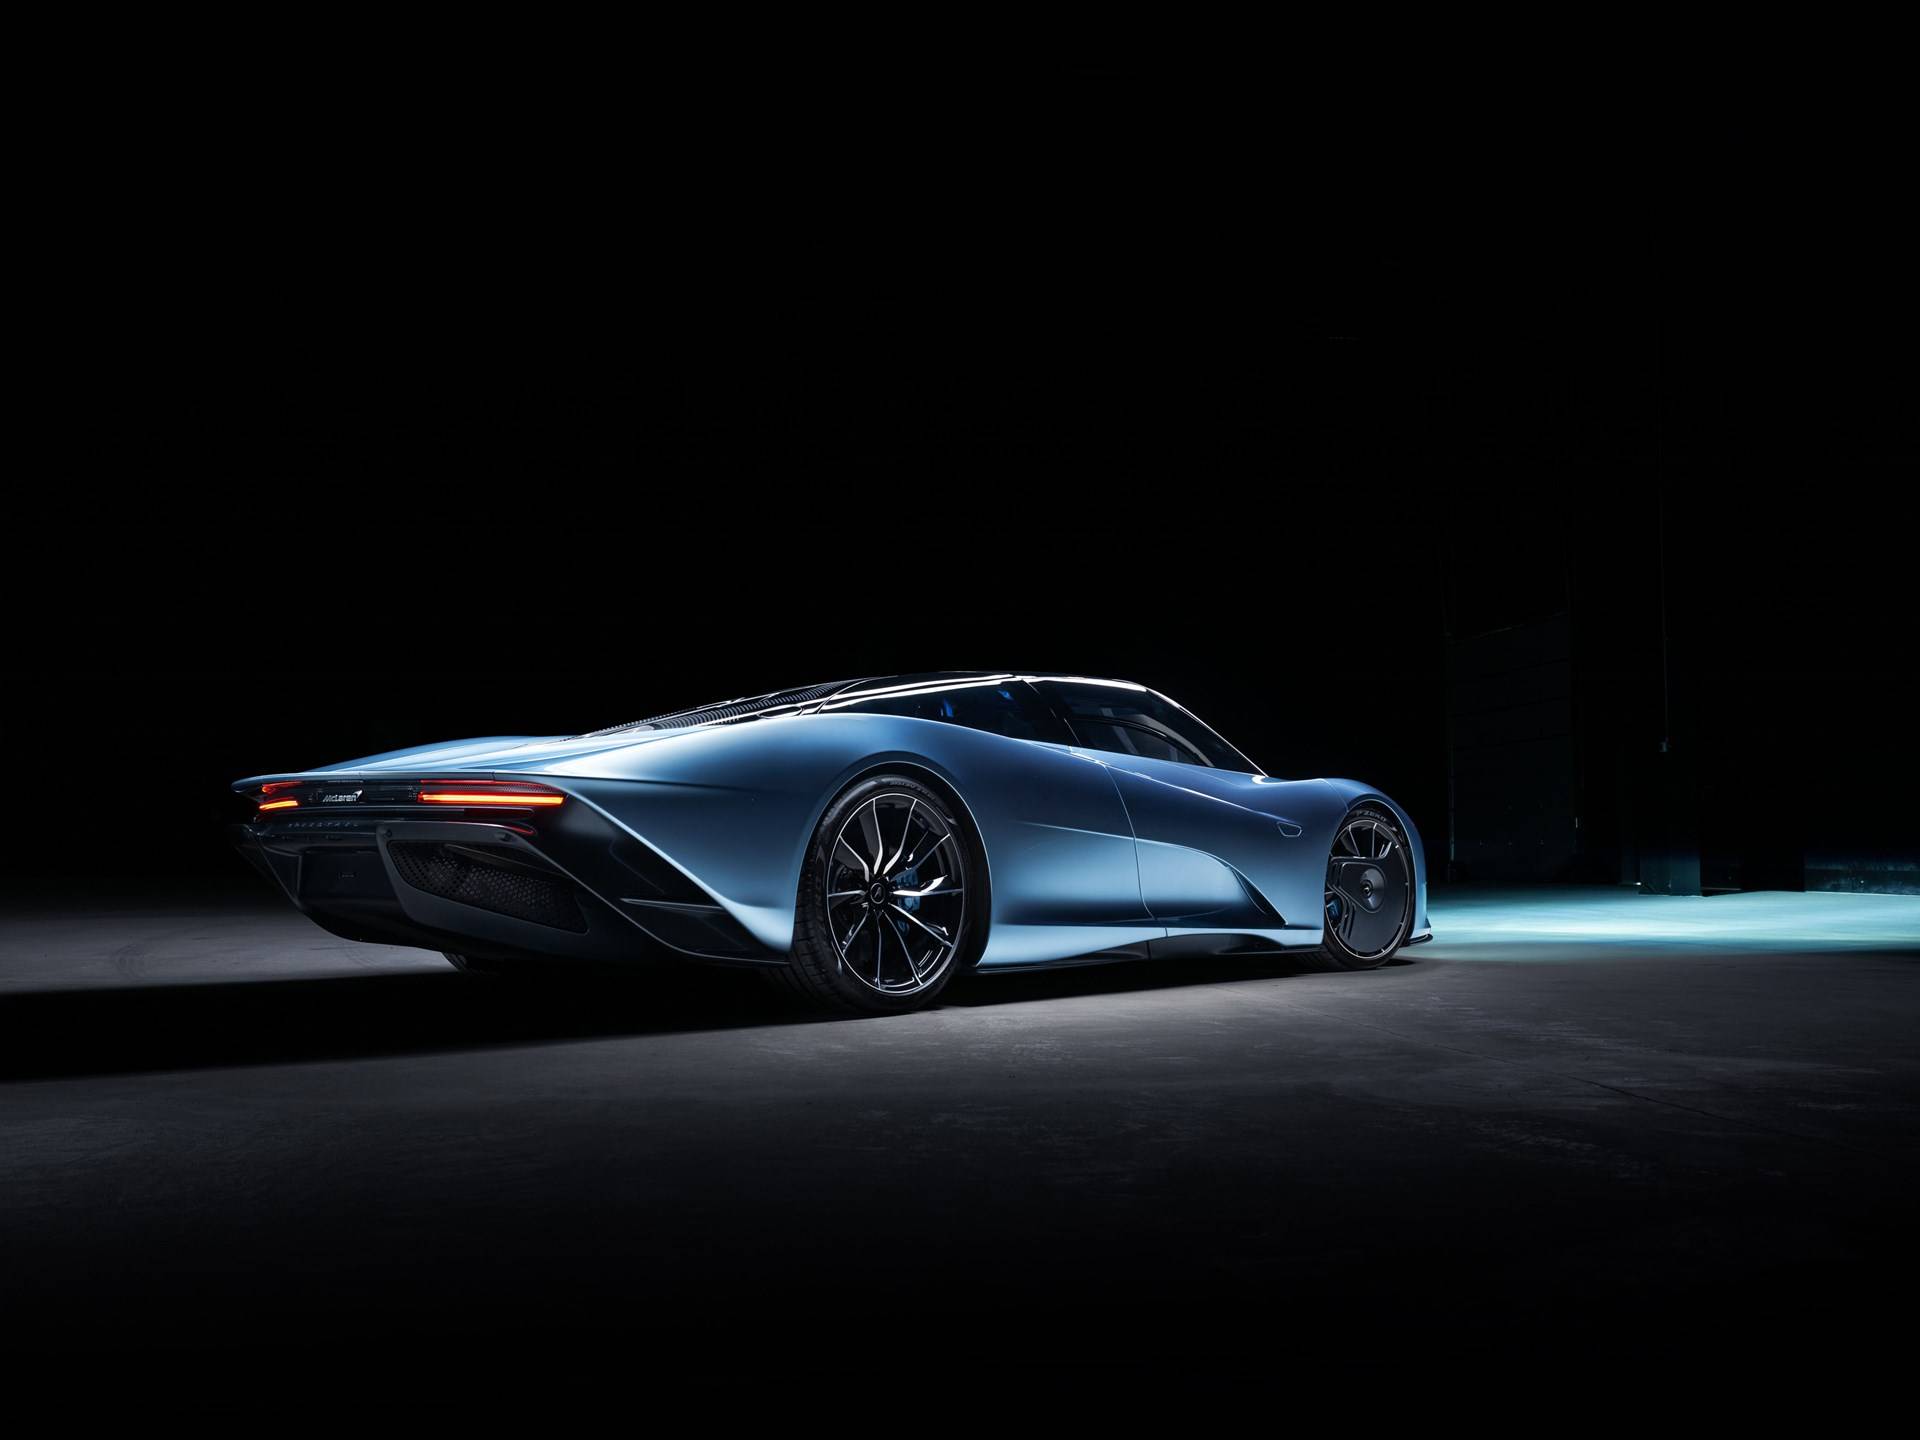 For Sale: McLaren Speedtail (2020) offered for Price on request